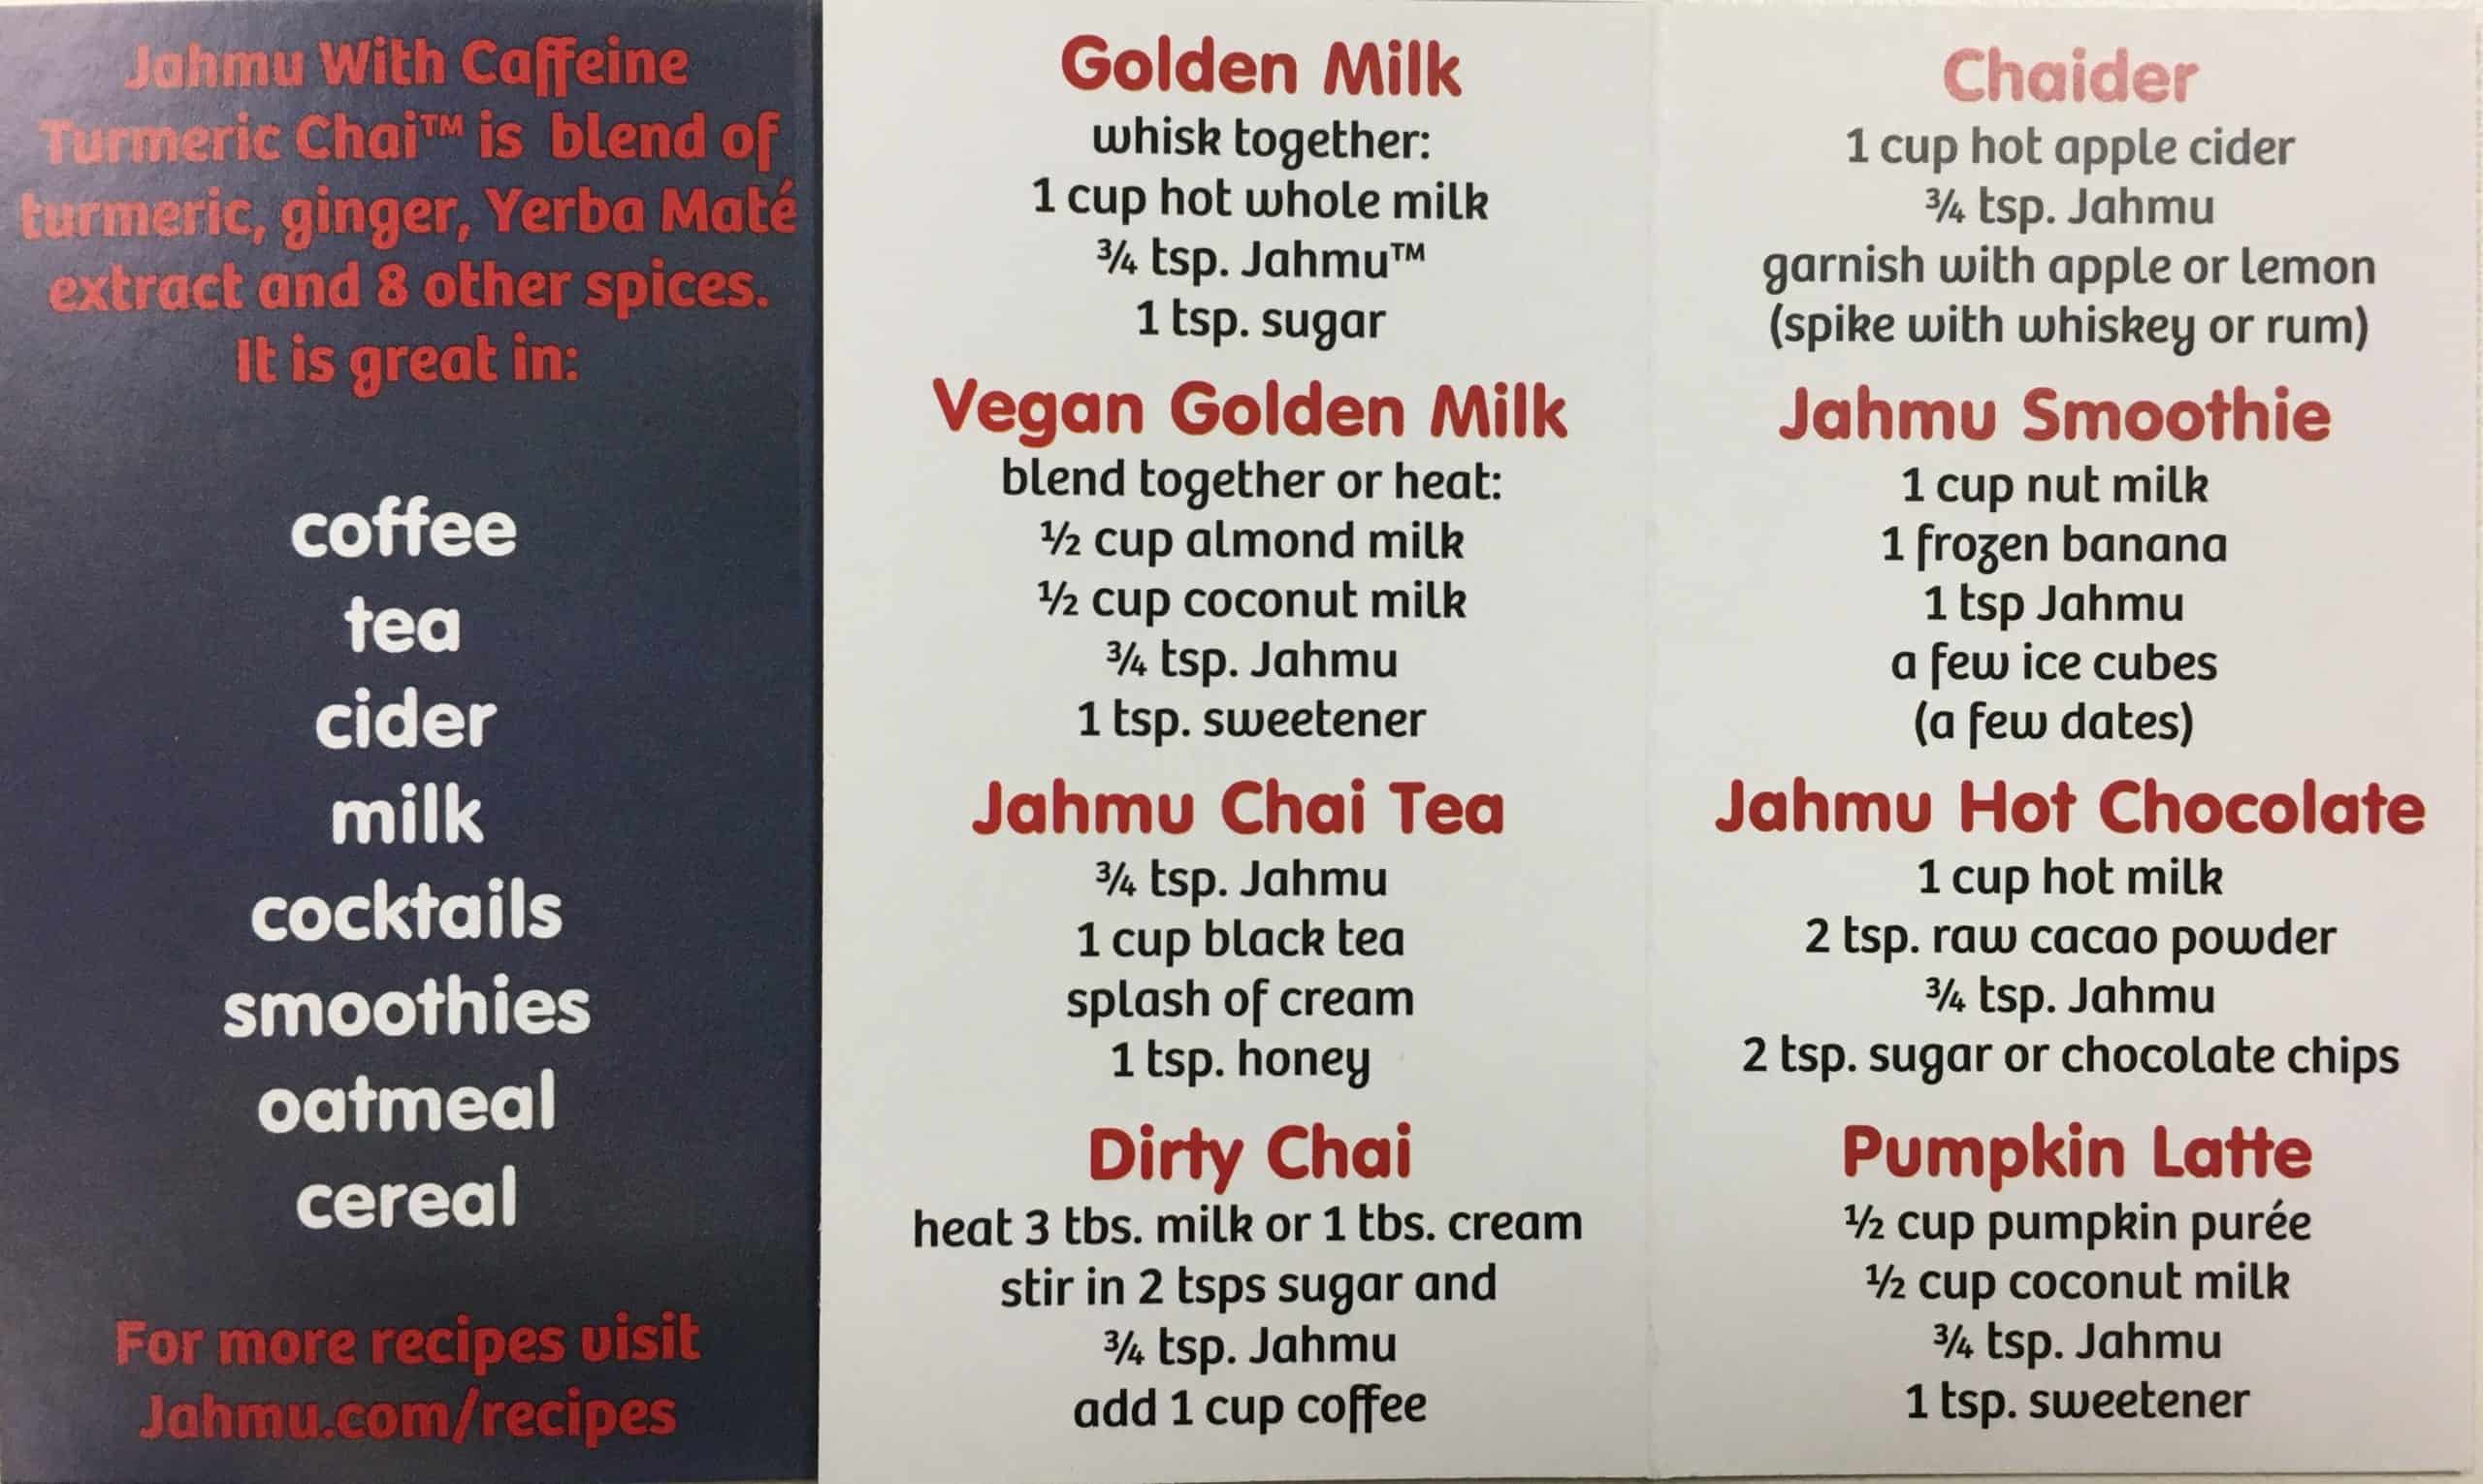 Golden Milk recipes made with Turmeric Chai Mix